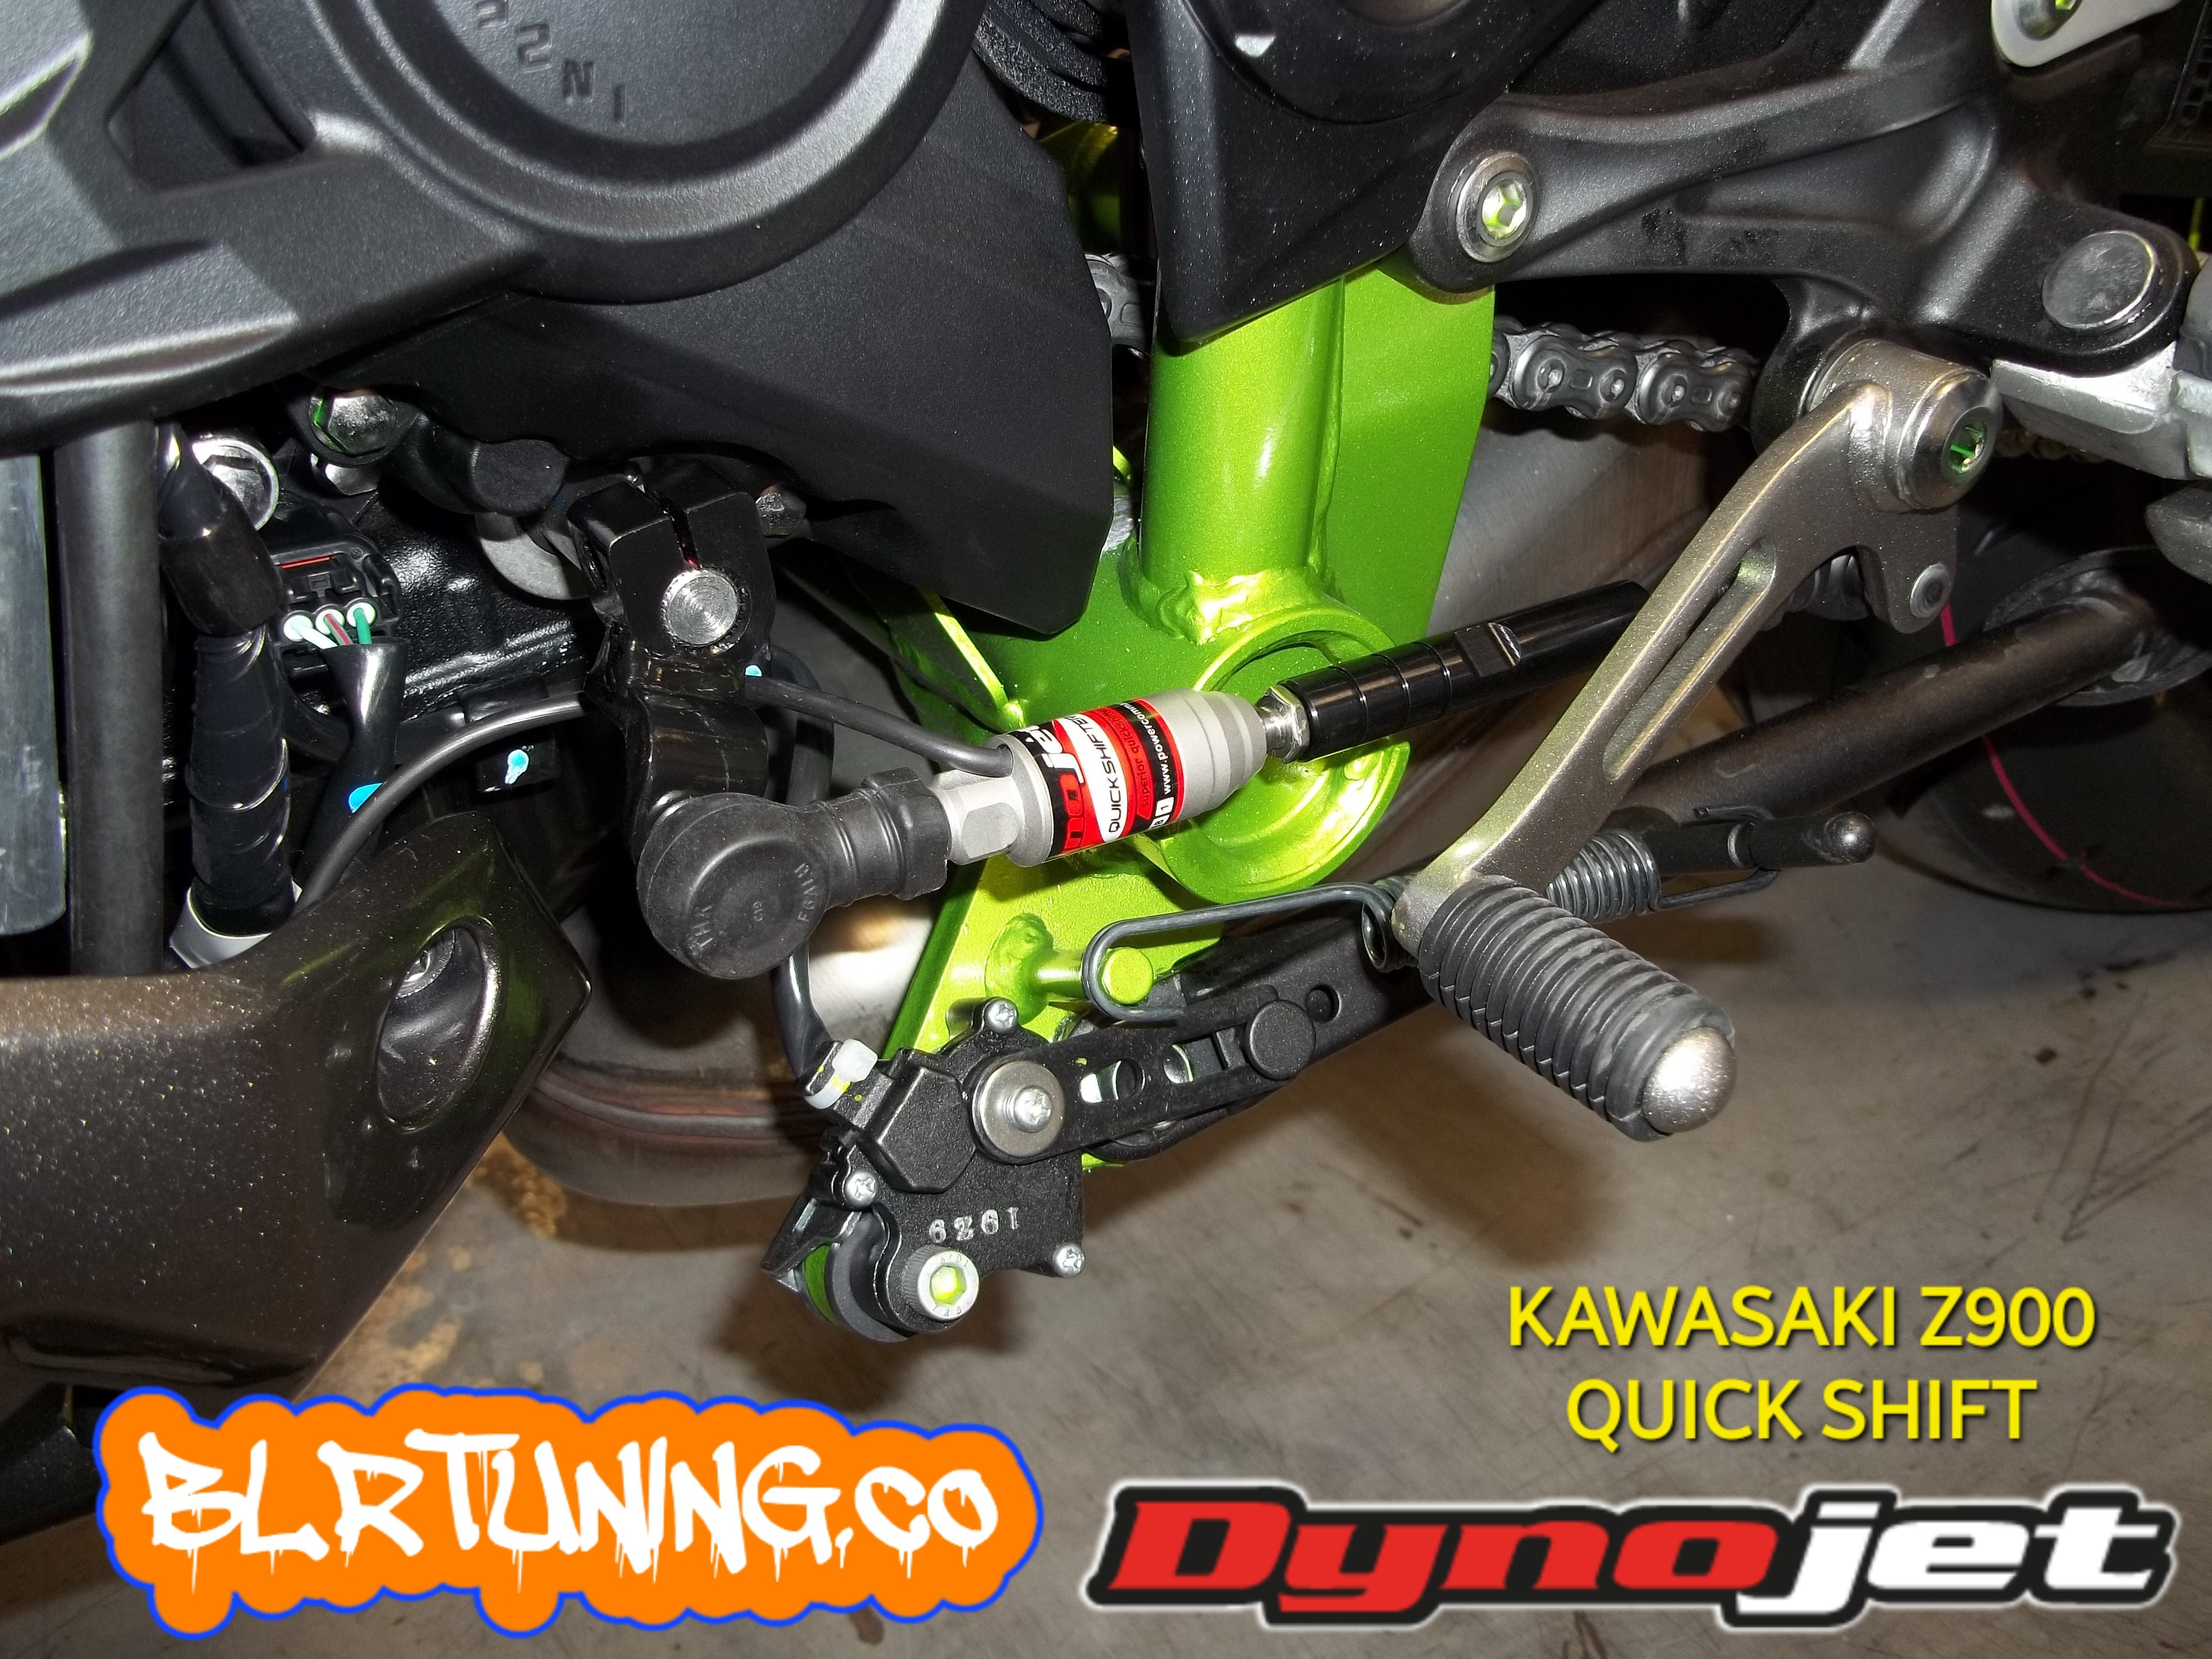 KAWASAKI Z900 QUICK SHIFT FOR PCV OR PC6 BY DYNOJET – BLR TUNING